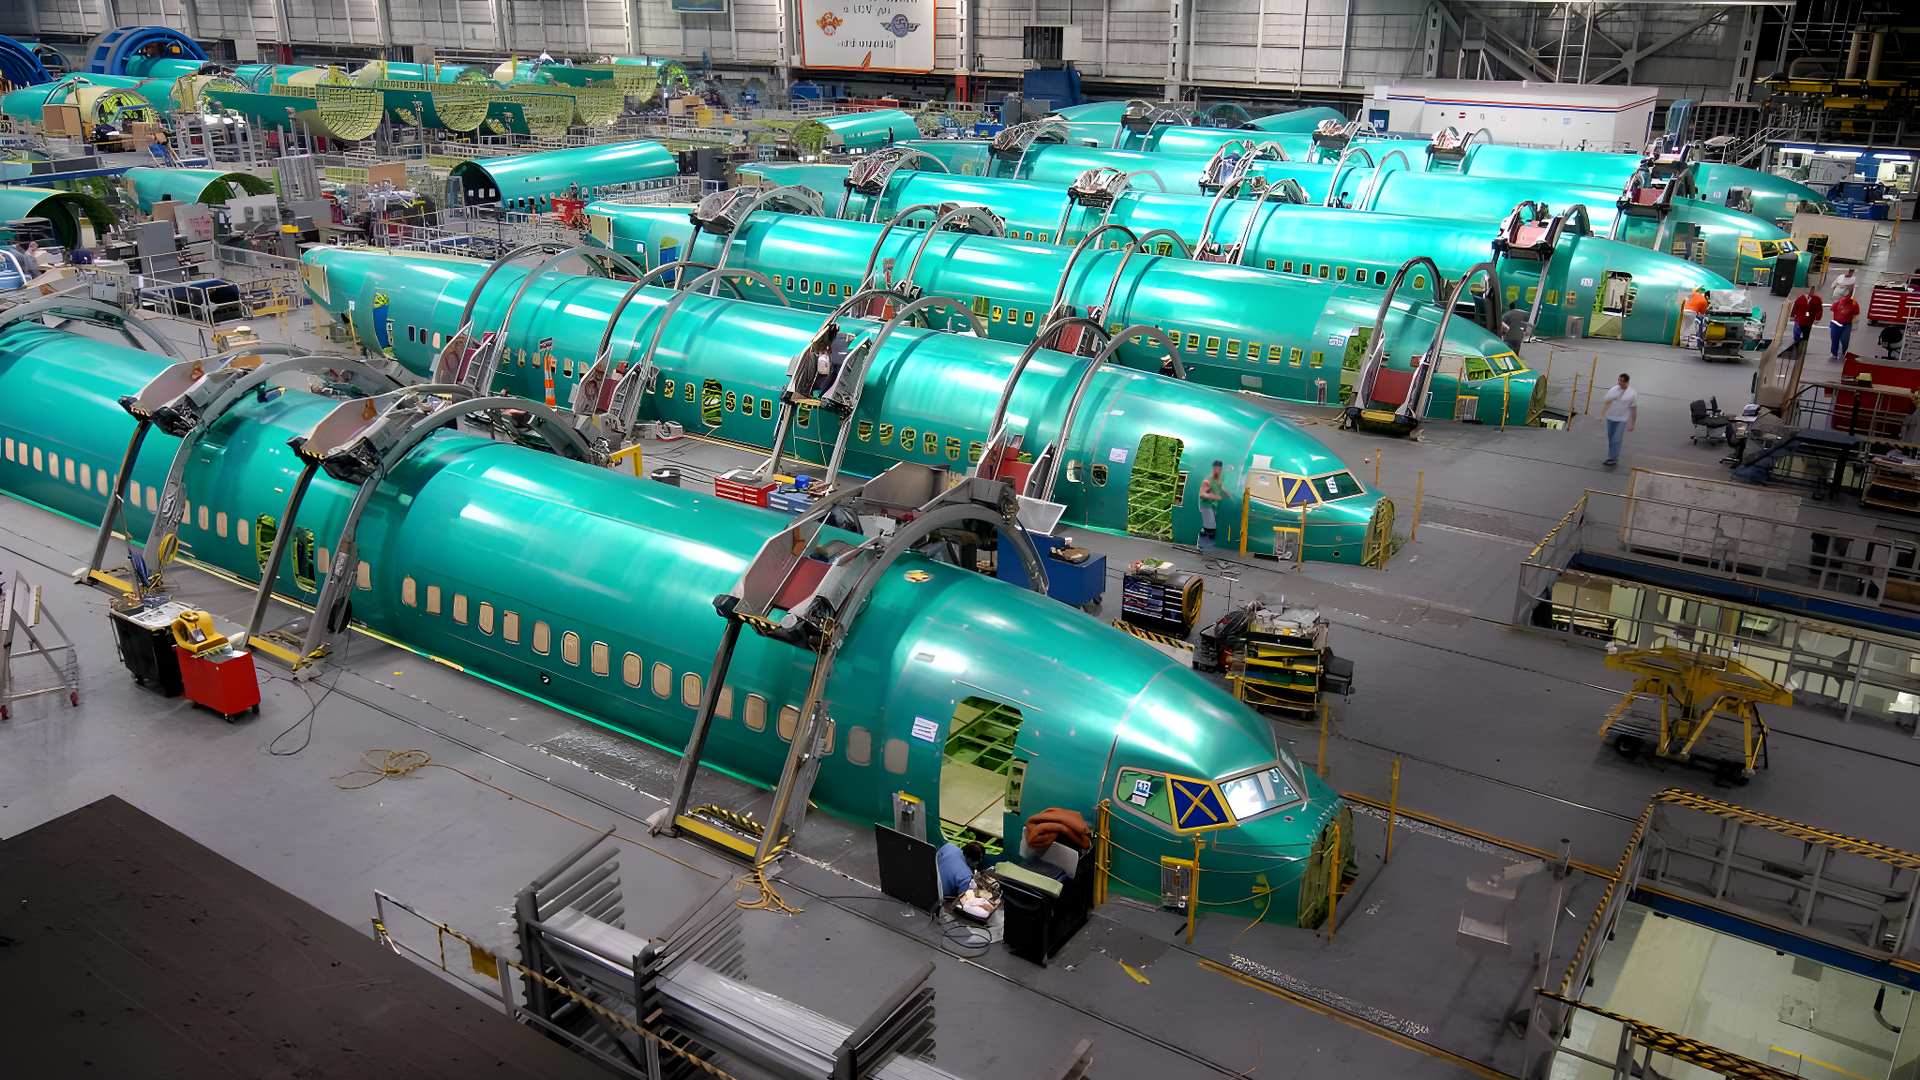 Spirit AeroSystems Sued Over Boeing 737 Quality Control Issues